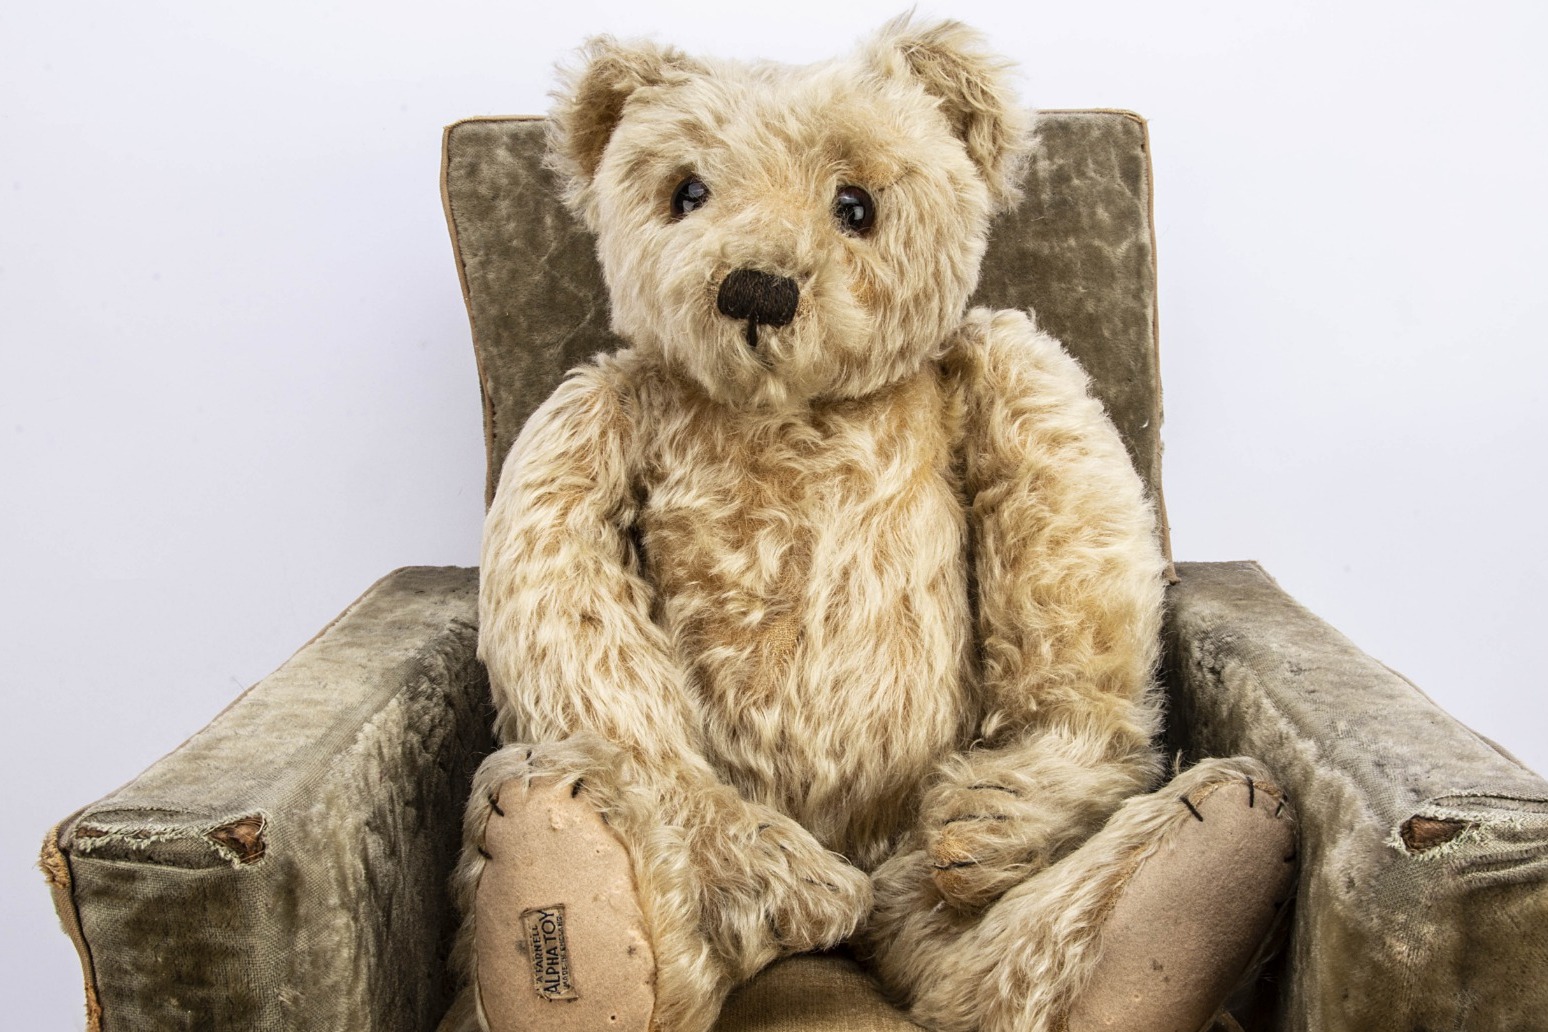 Teddy collector set to auction more than 1000 bears accumulated over 58 years